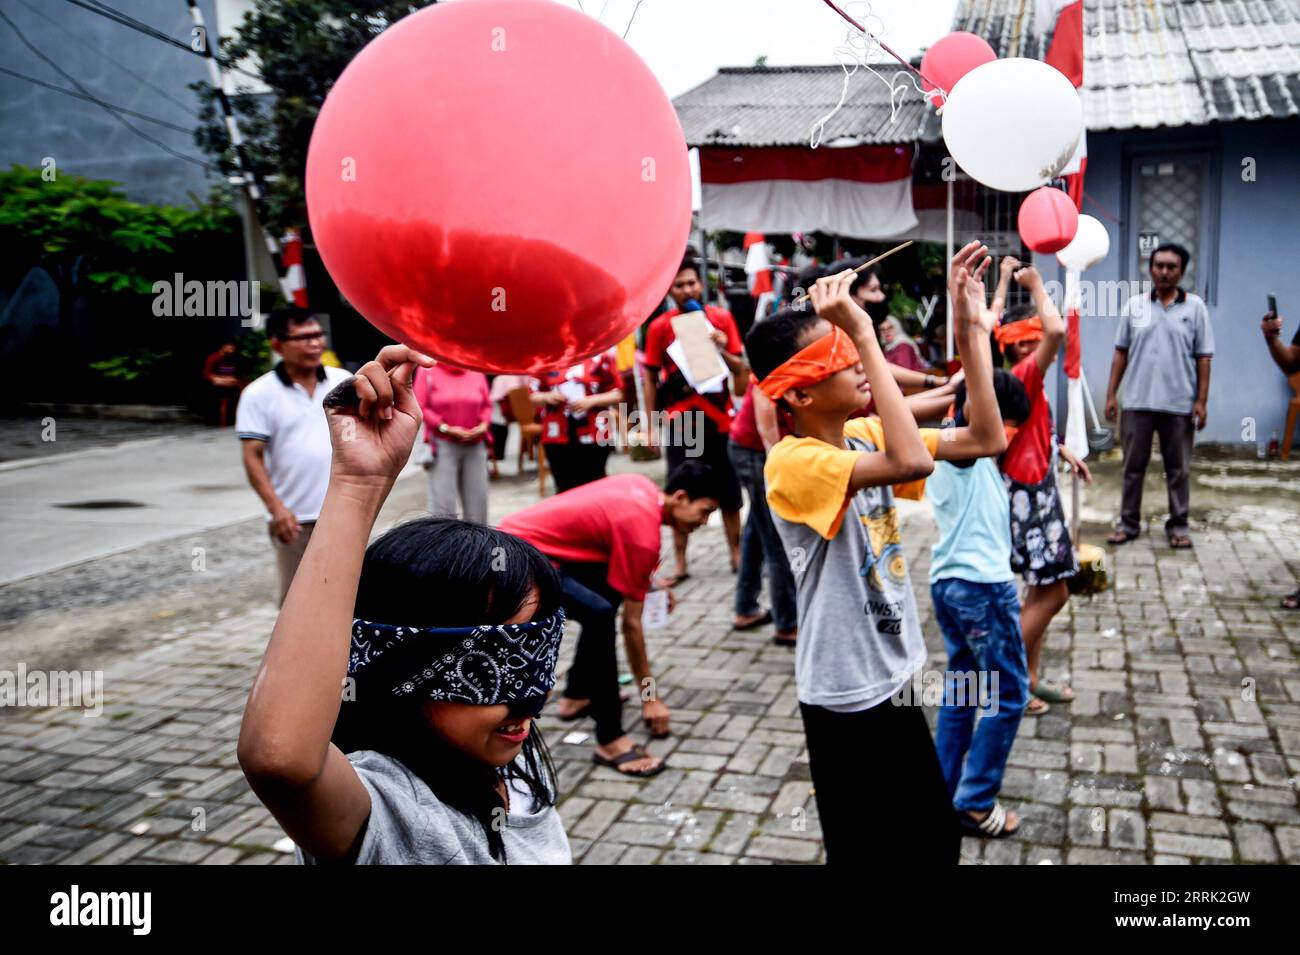 220817 -- SOUTH TANGERANG, Aug. 17, 2022 -- Children participate in a balloon piercing game during the 77th Independence Day celebration in South Tangerang, Banten Province, Indonesia, Aug. 17, 2022.  INDONESIA-SOUTH TANGERANG-INDEPENDENCE DAY-CELEBRATION AgungxKuncahyaxB. PUBLICATIONxNOTxINxCHN Stock Photo